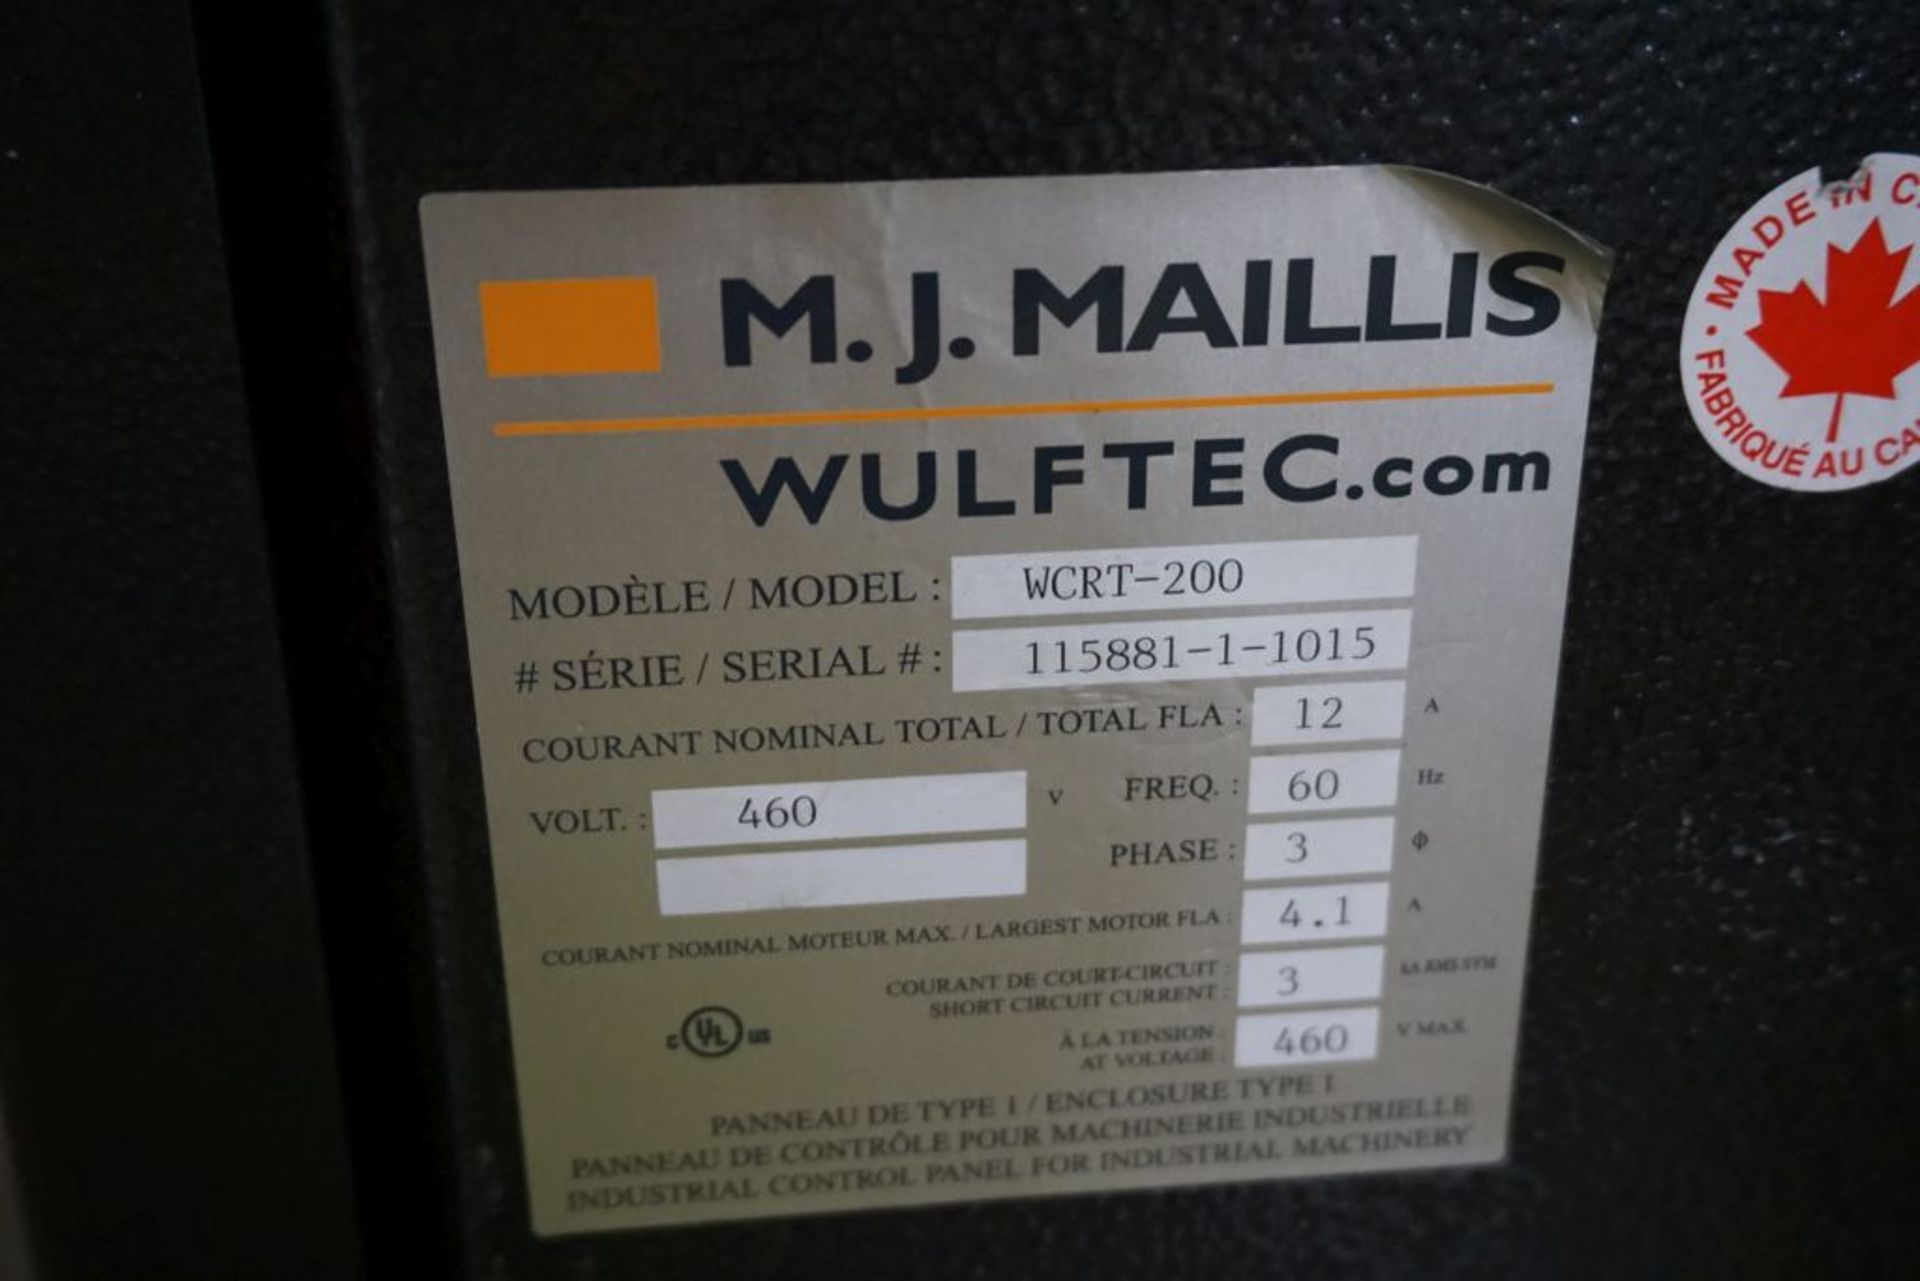 MJ Maillis/Wulftec Autowrapper - Model No. WCRT-200; Serial No. 115881-1-1015; 460V; Includes:; - Image 46 of 53